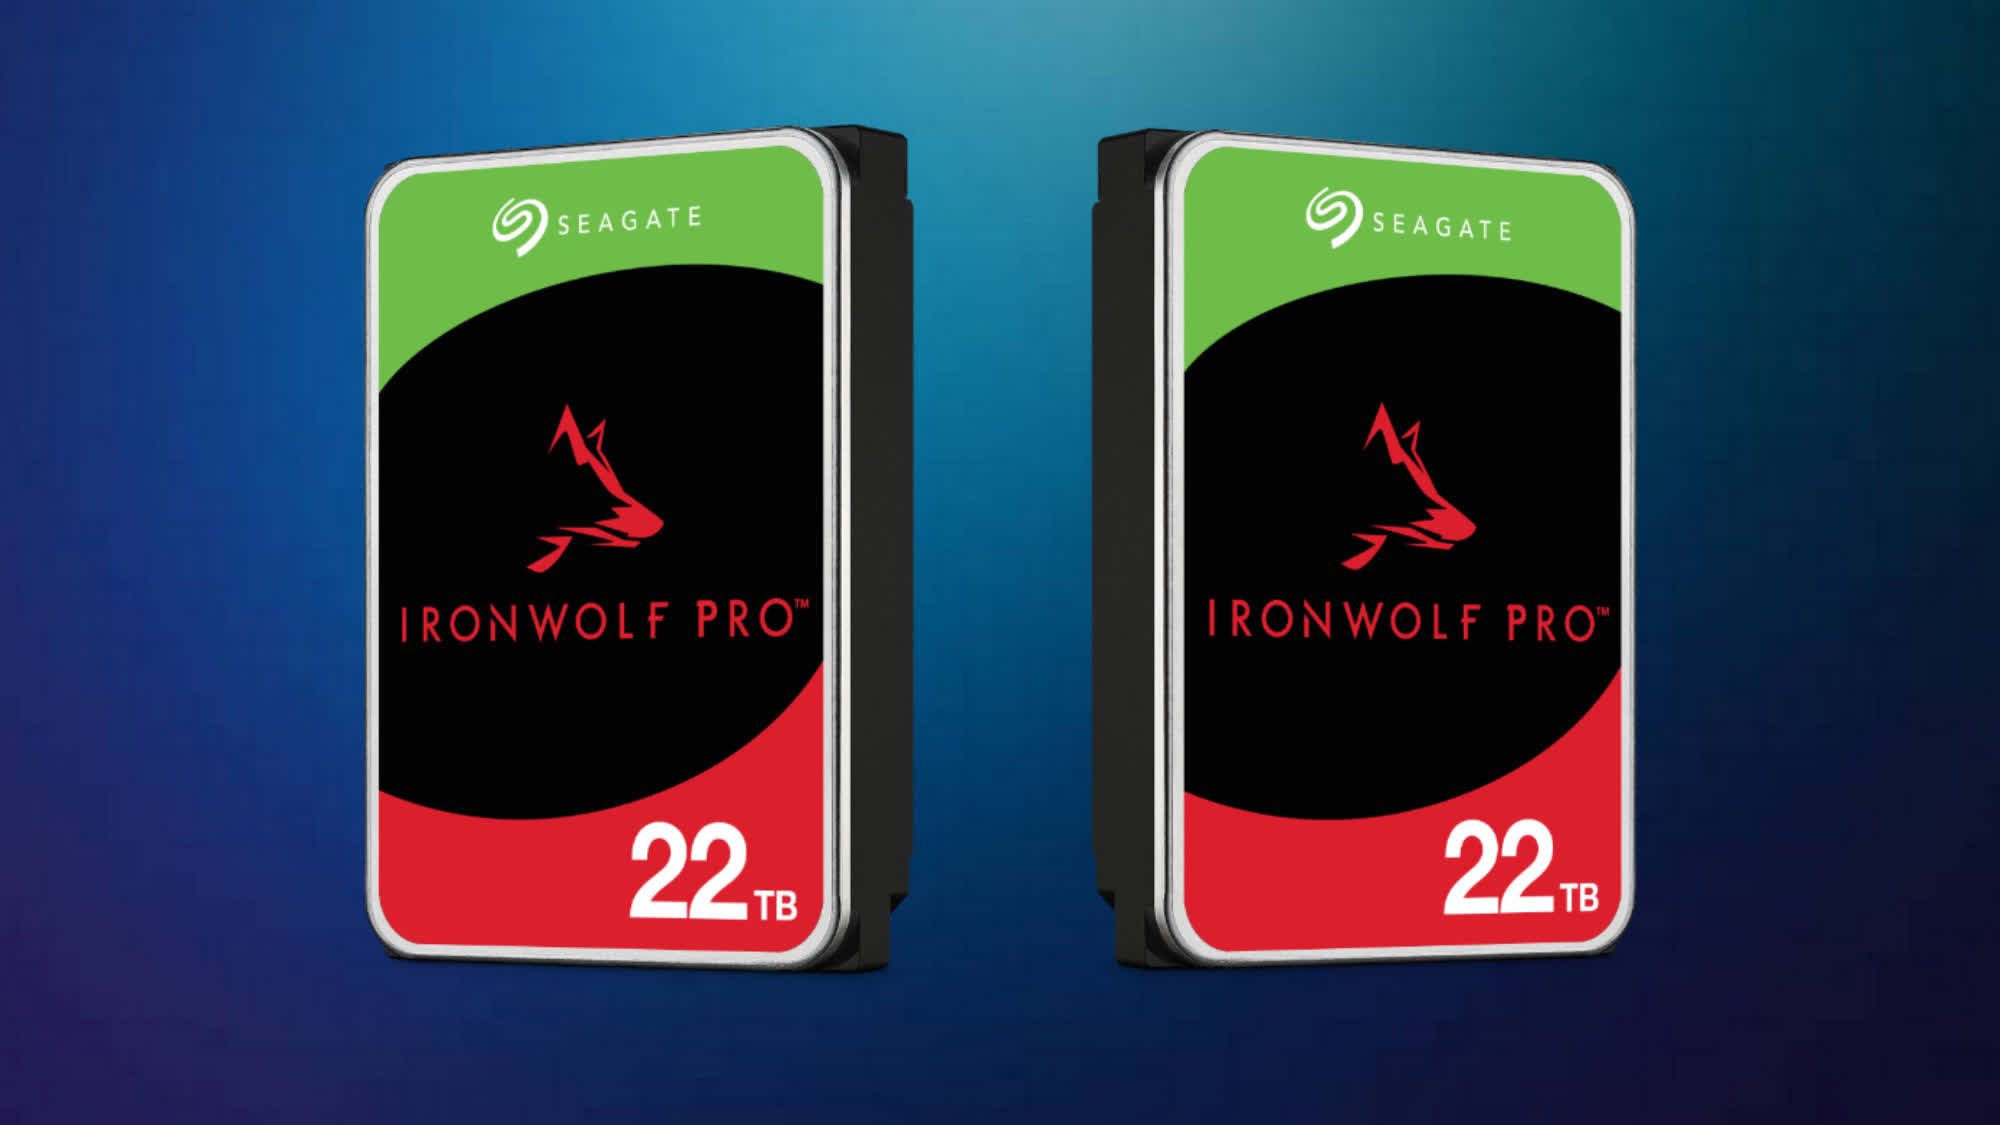 Seagate unveils new 22TB IronWolf Pro hard drive at NAB conference